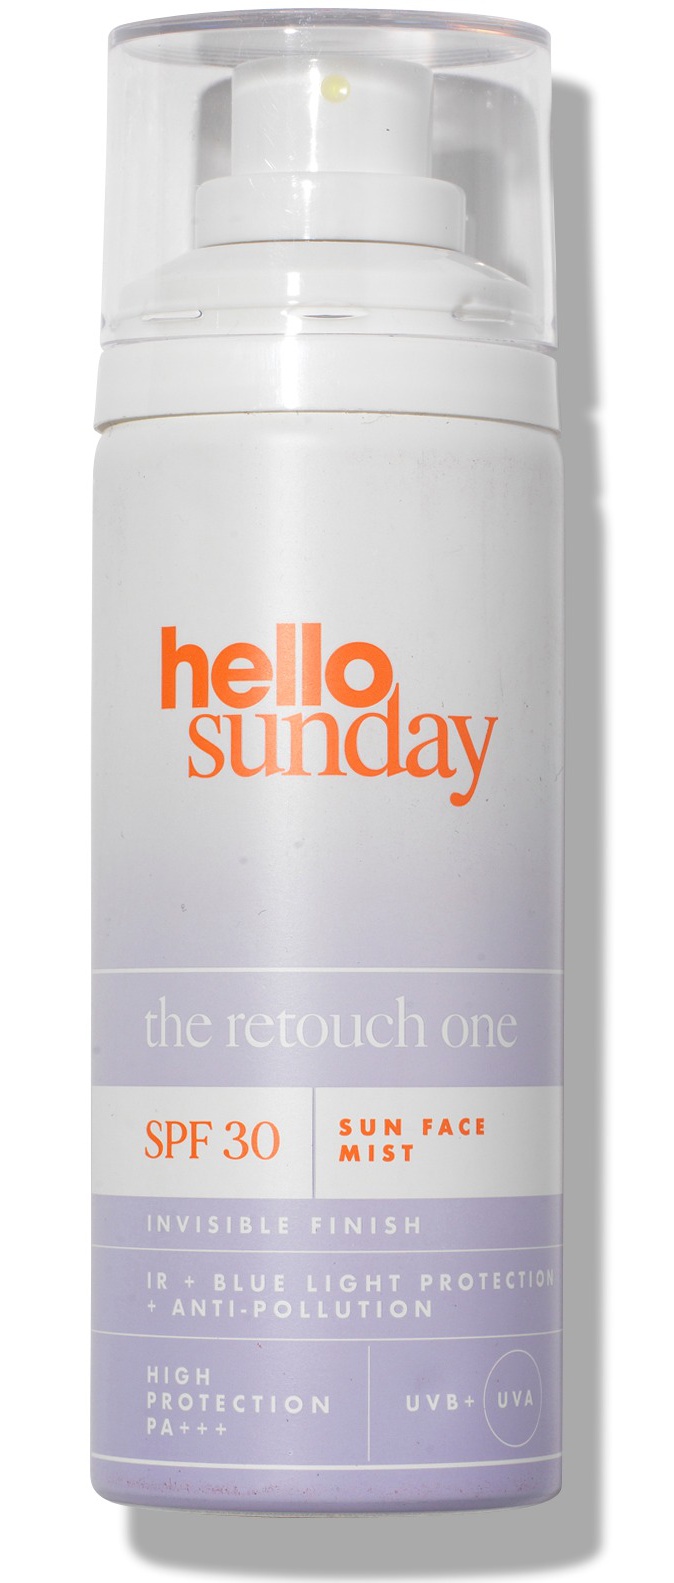 Hello Sunday The Retouch One - Face Mist: SPF 30